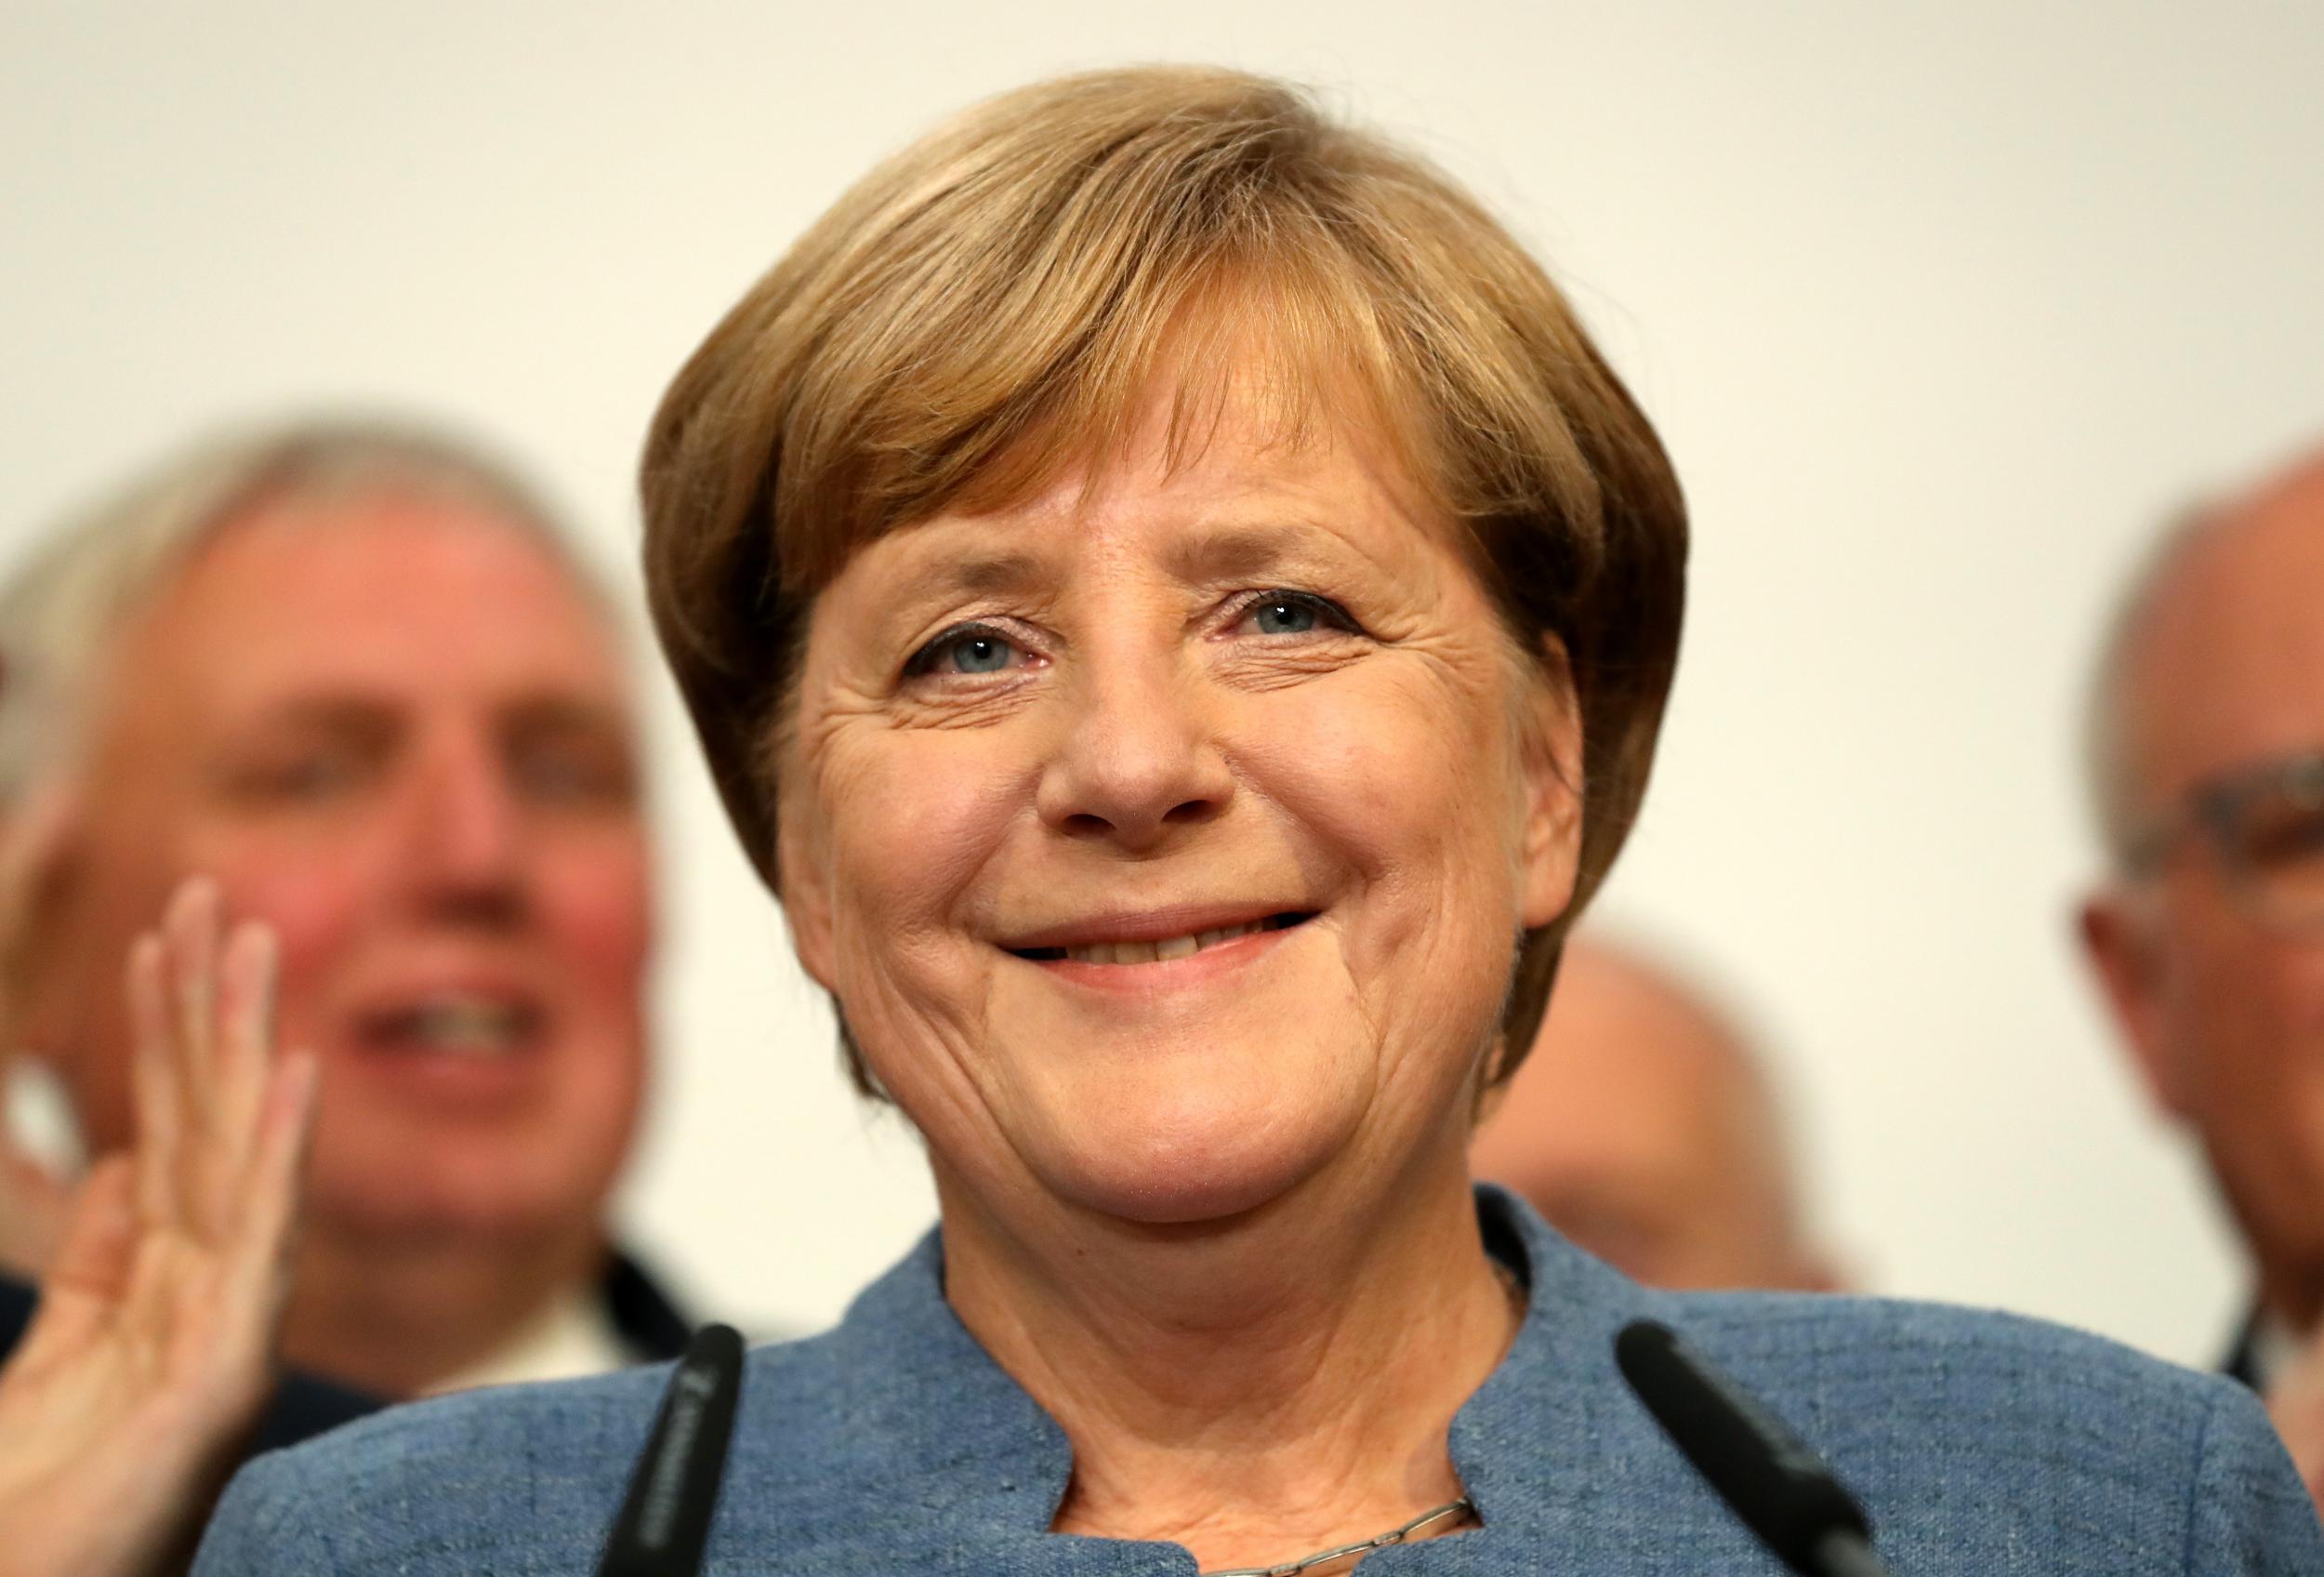 Angela Merkel speaks after initial results show her on course to win a fourth term